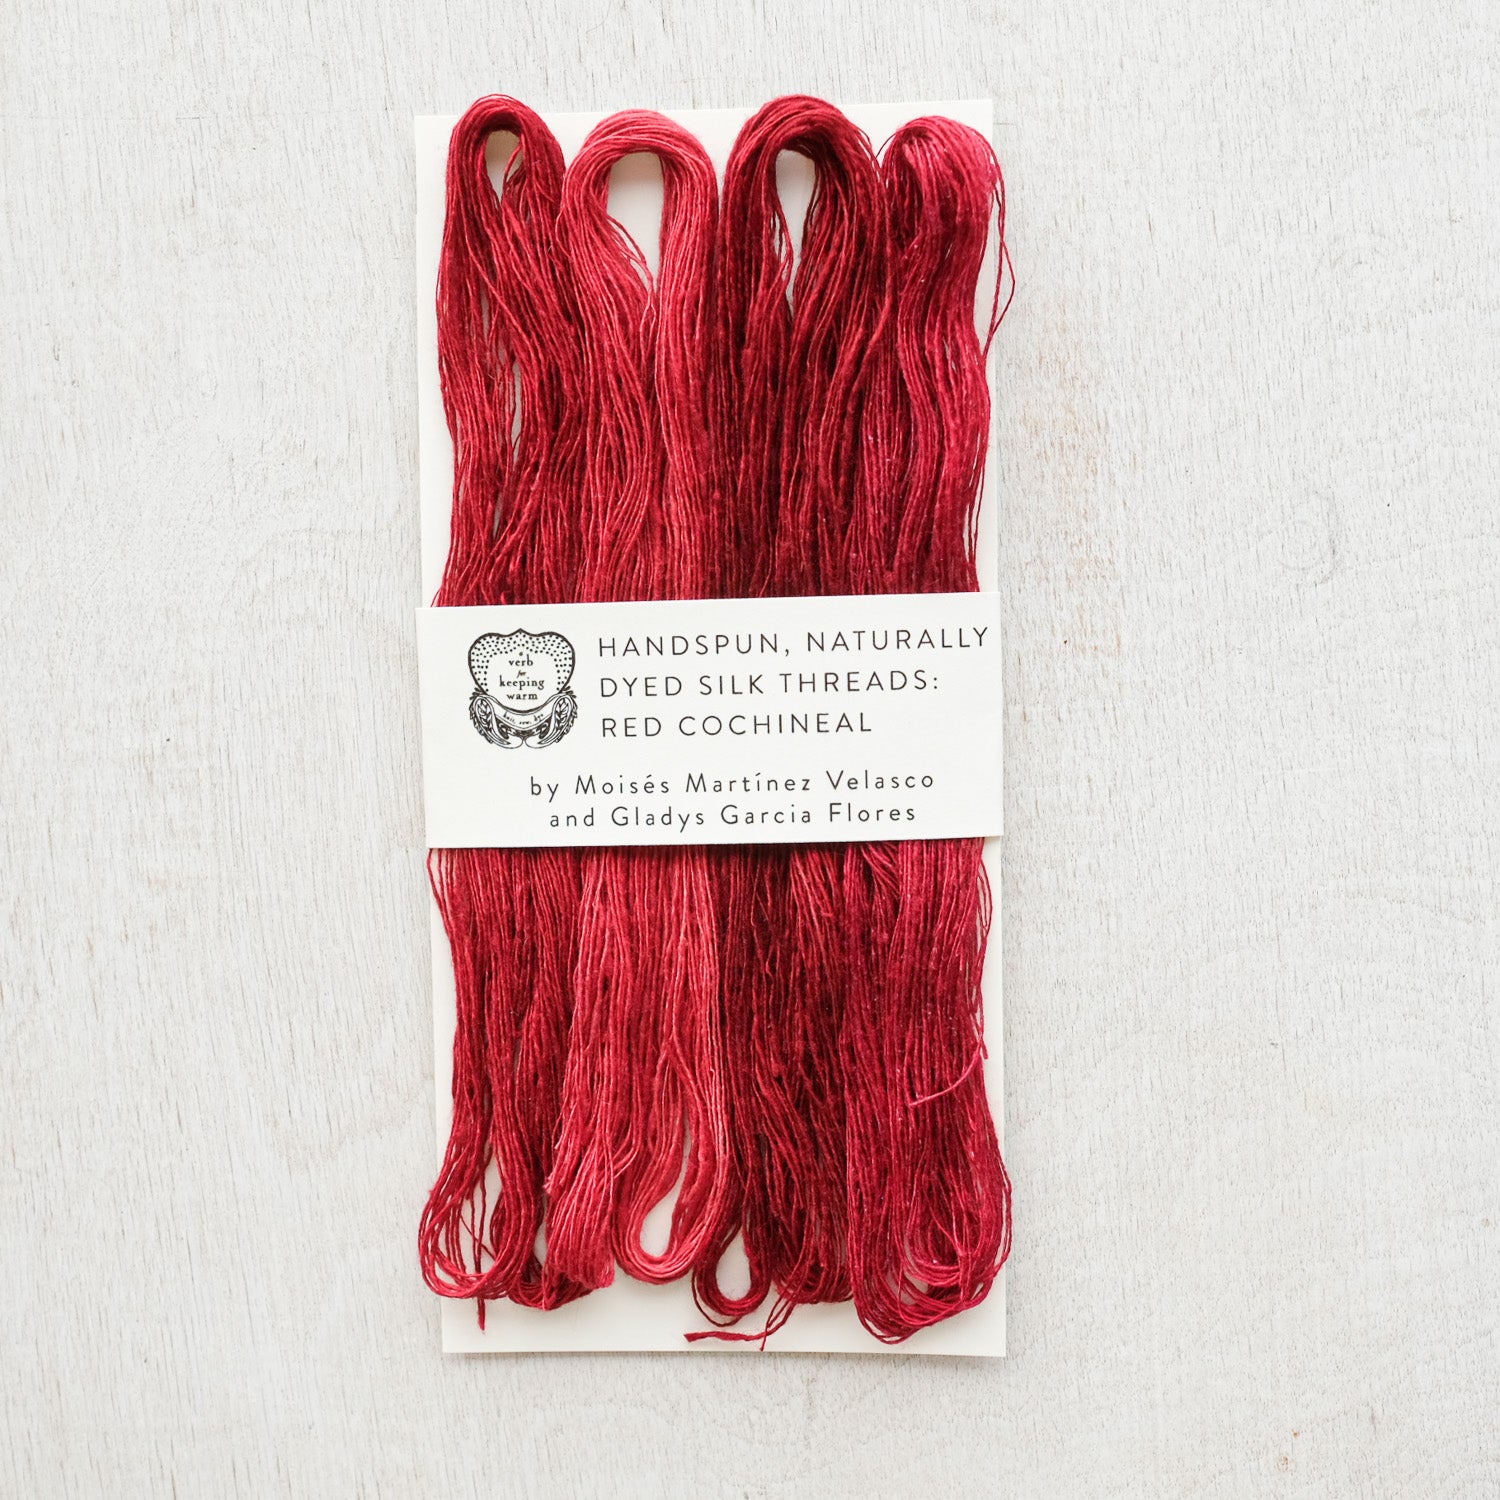 Label: Red Cochineal